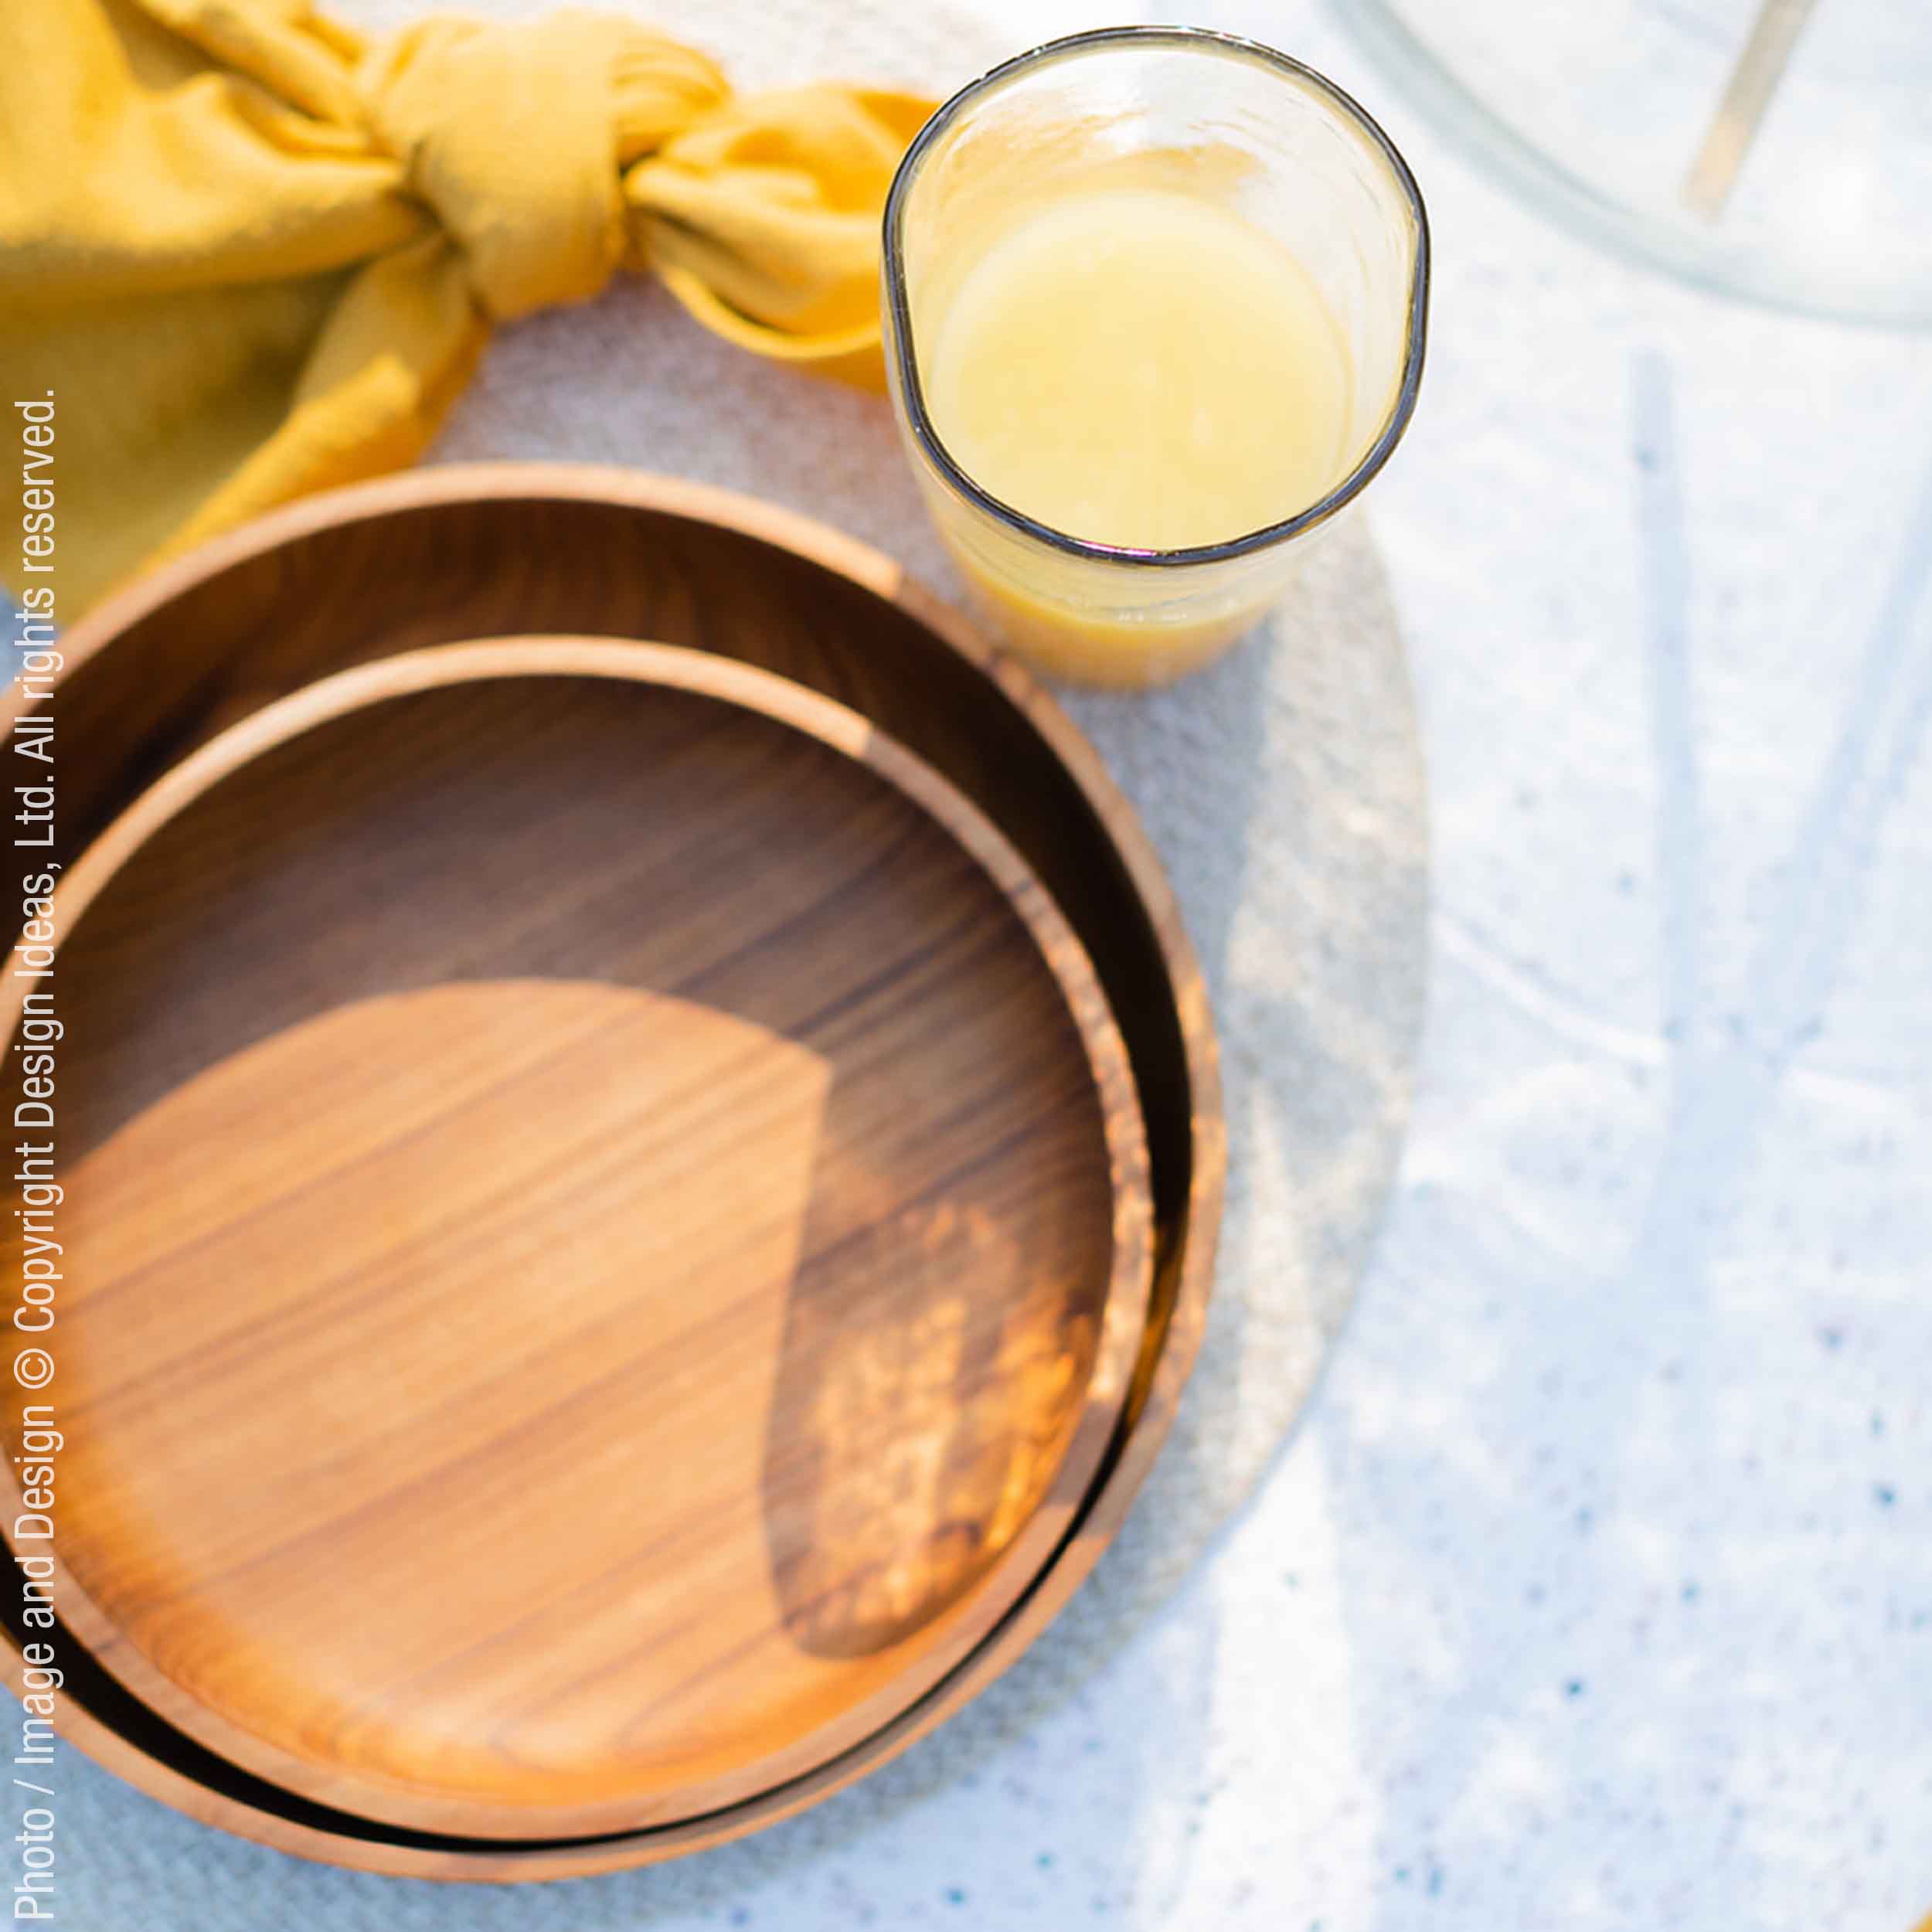 Chiku™ bowl (9.8" dia) - Natural | Image 2 | Premium Bowl from the Chiku collection | made with Teak wood for long lasting use | sustainably sourced with recycled materials | texxture